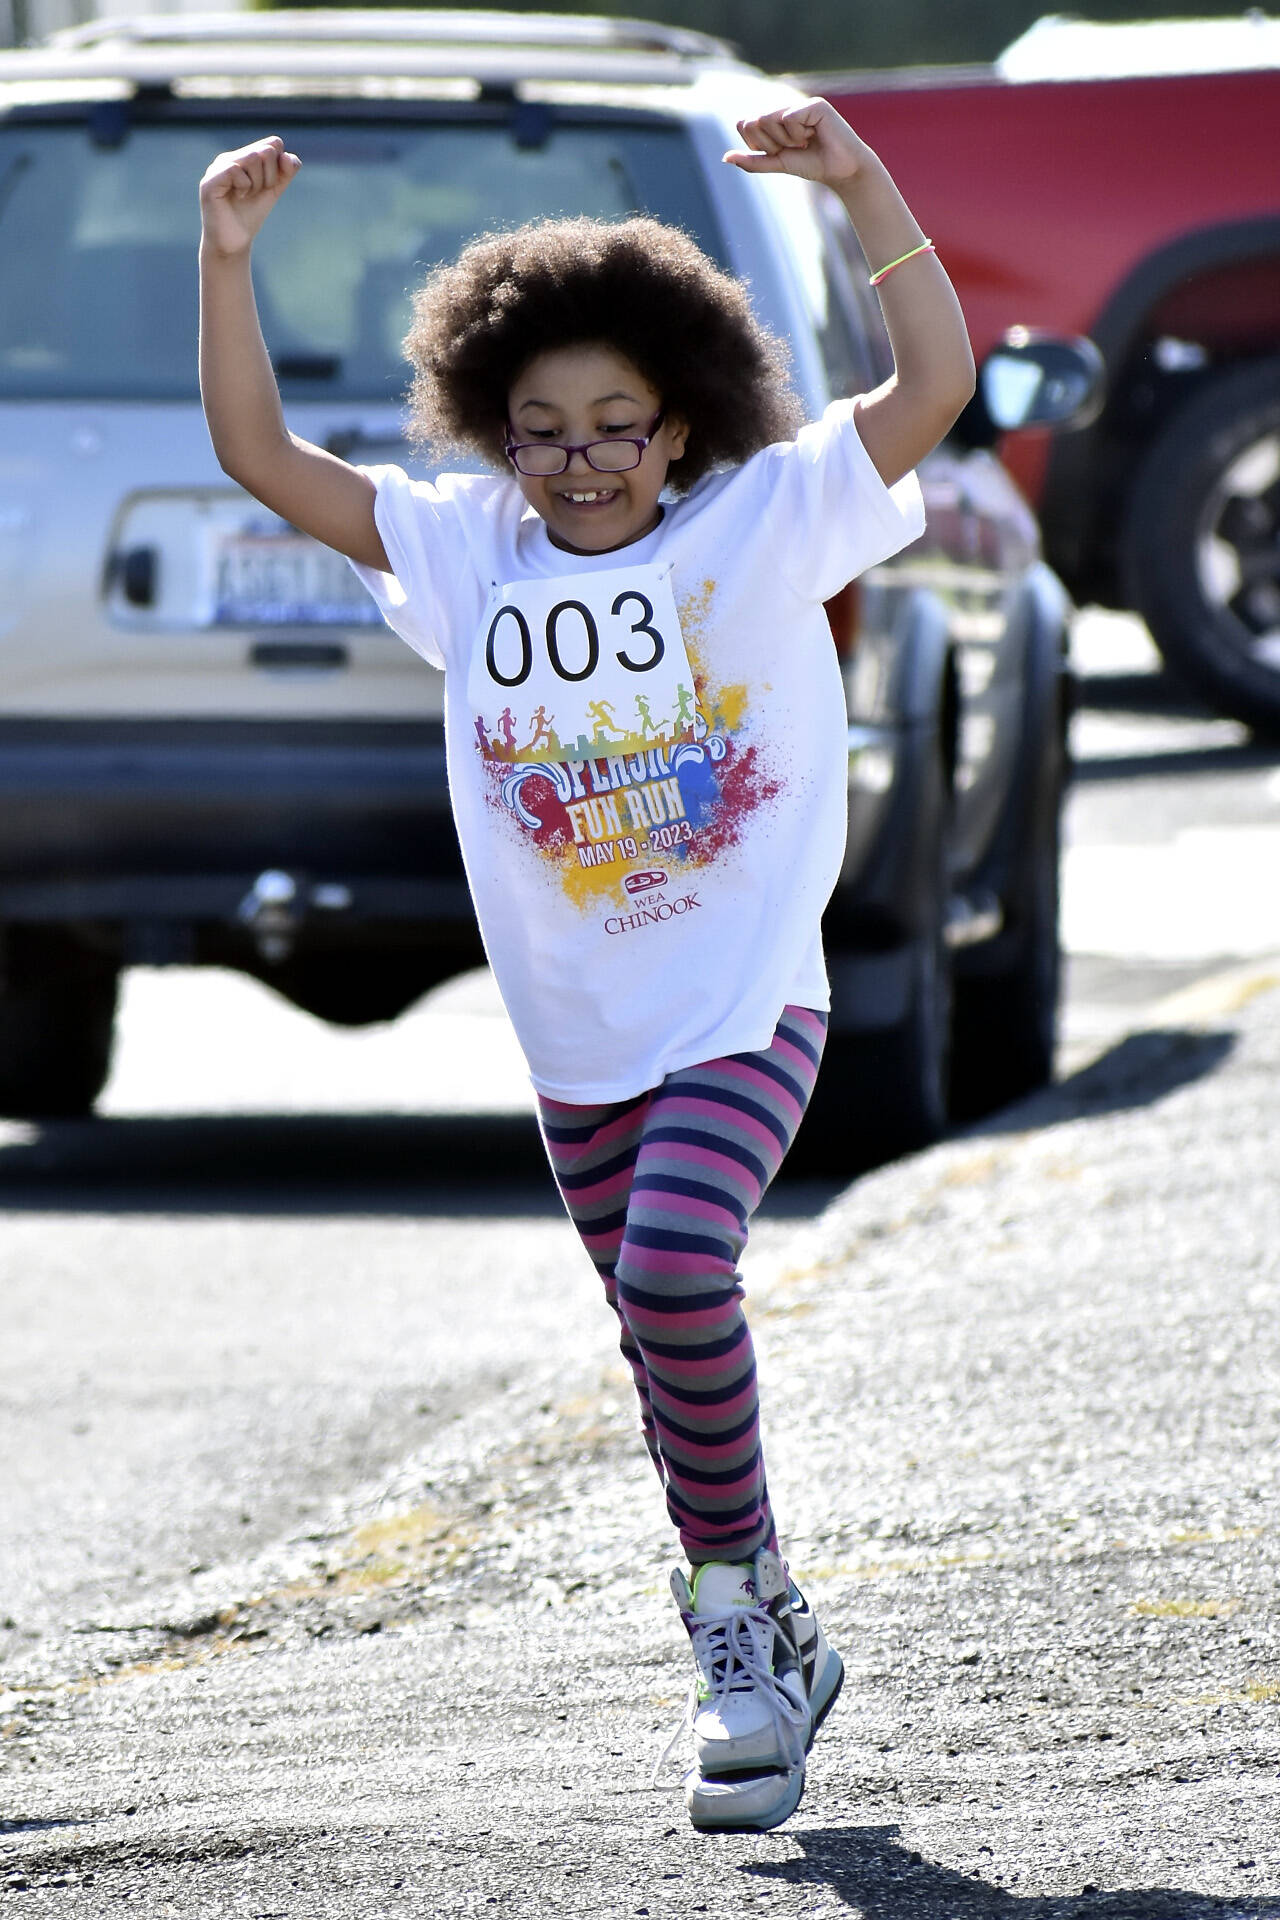 SUBMITTED PHOTO A competitor celebrates during the AJ West Elementary School Fun Run on Friday in Aberdeen.